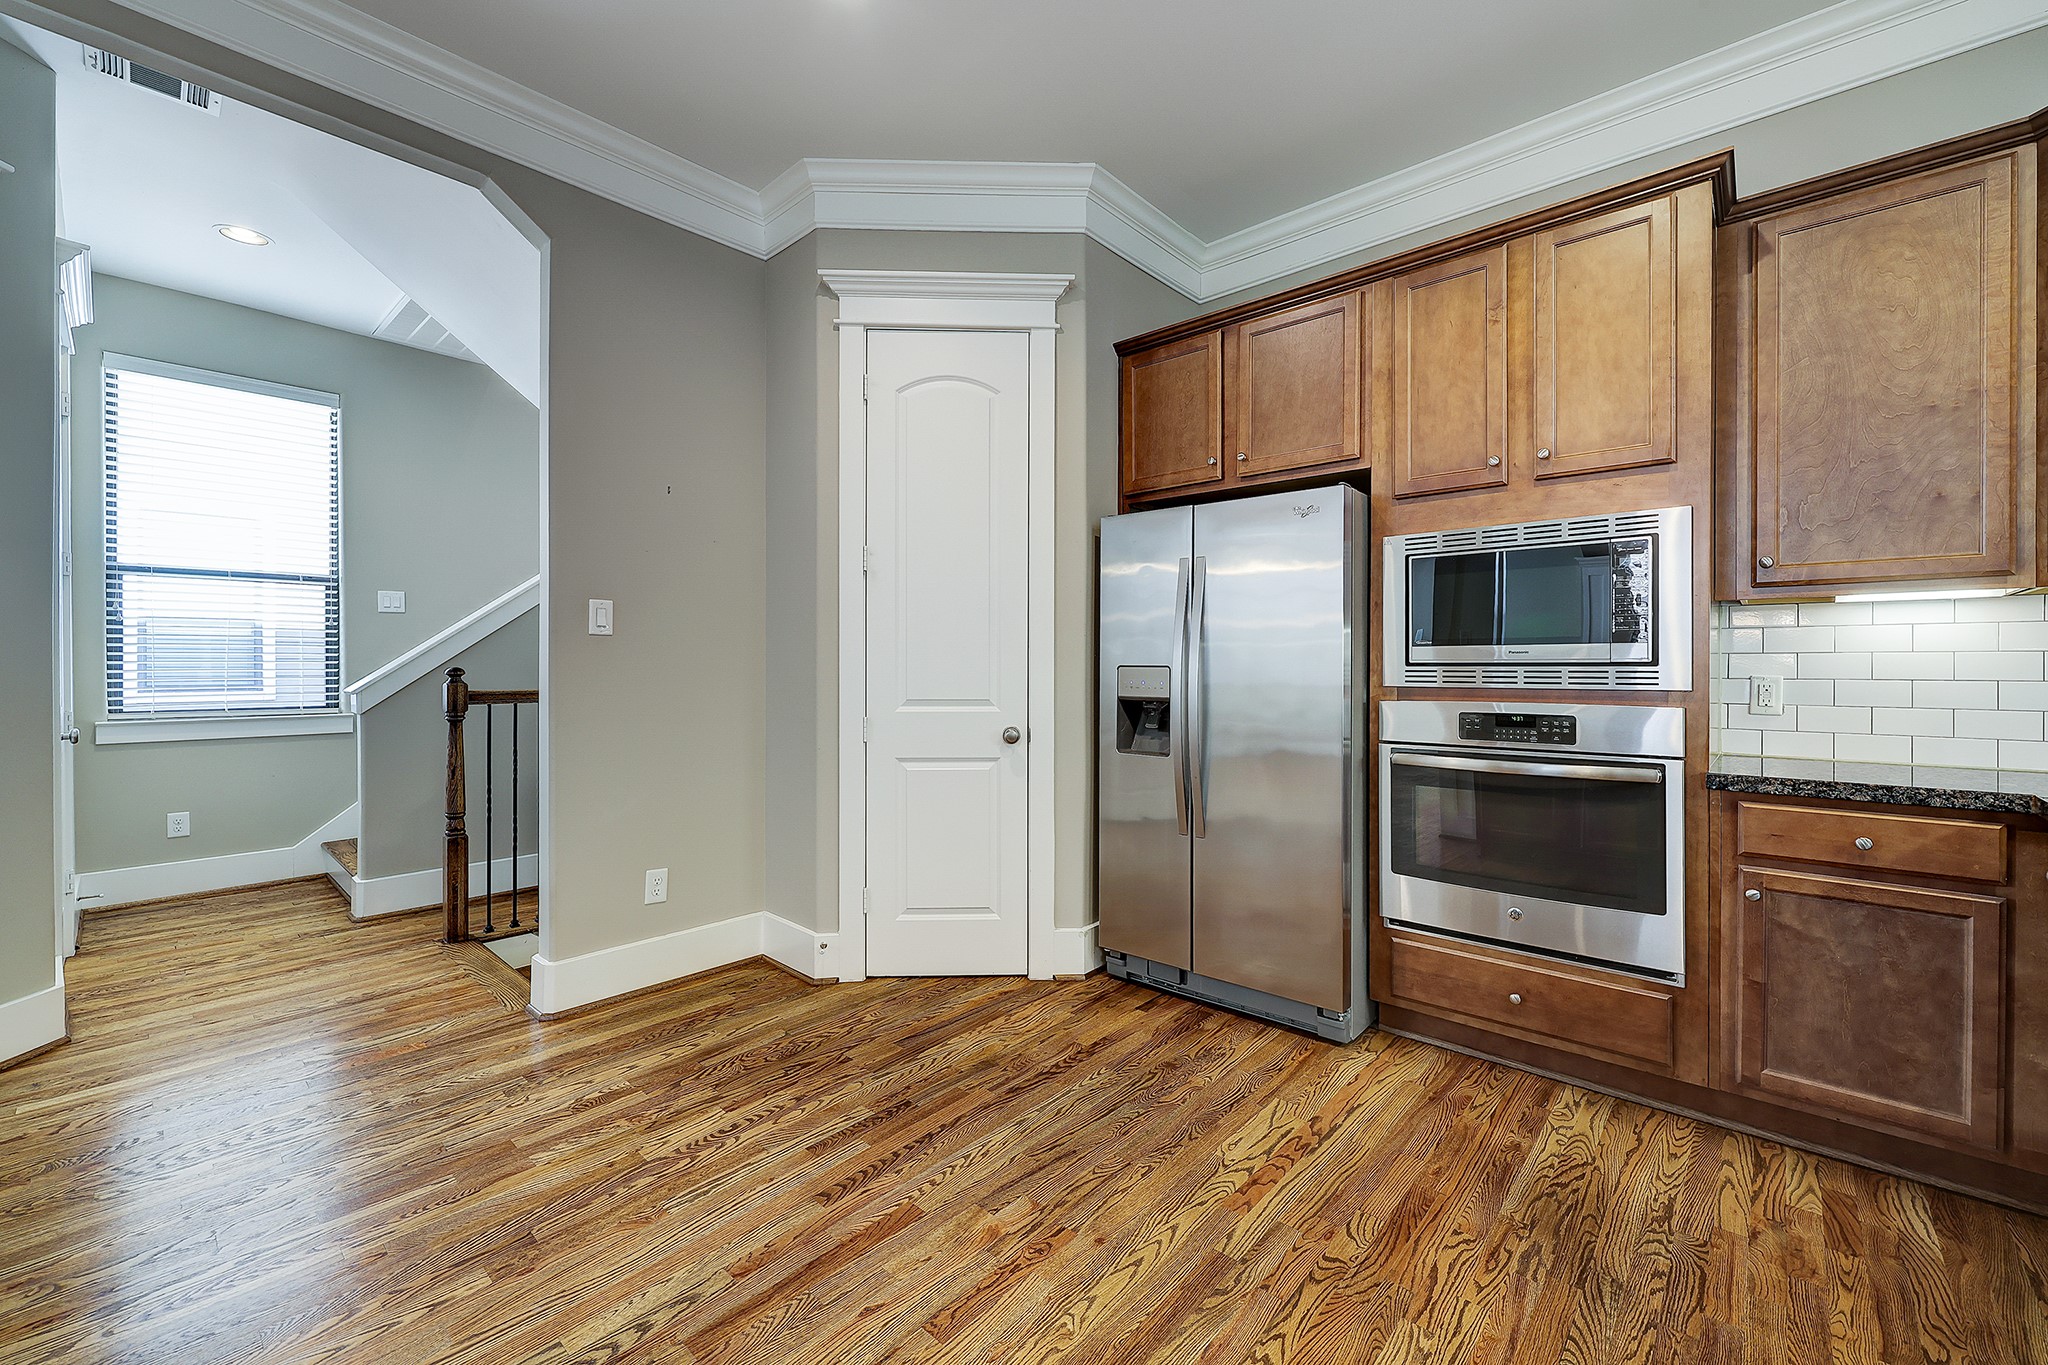 Granite counters, gas range, built in oven and microwave, custom cabinets......a chef's dream kitchen.